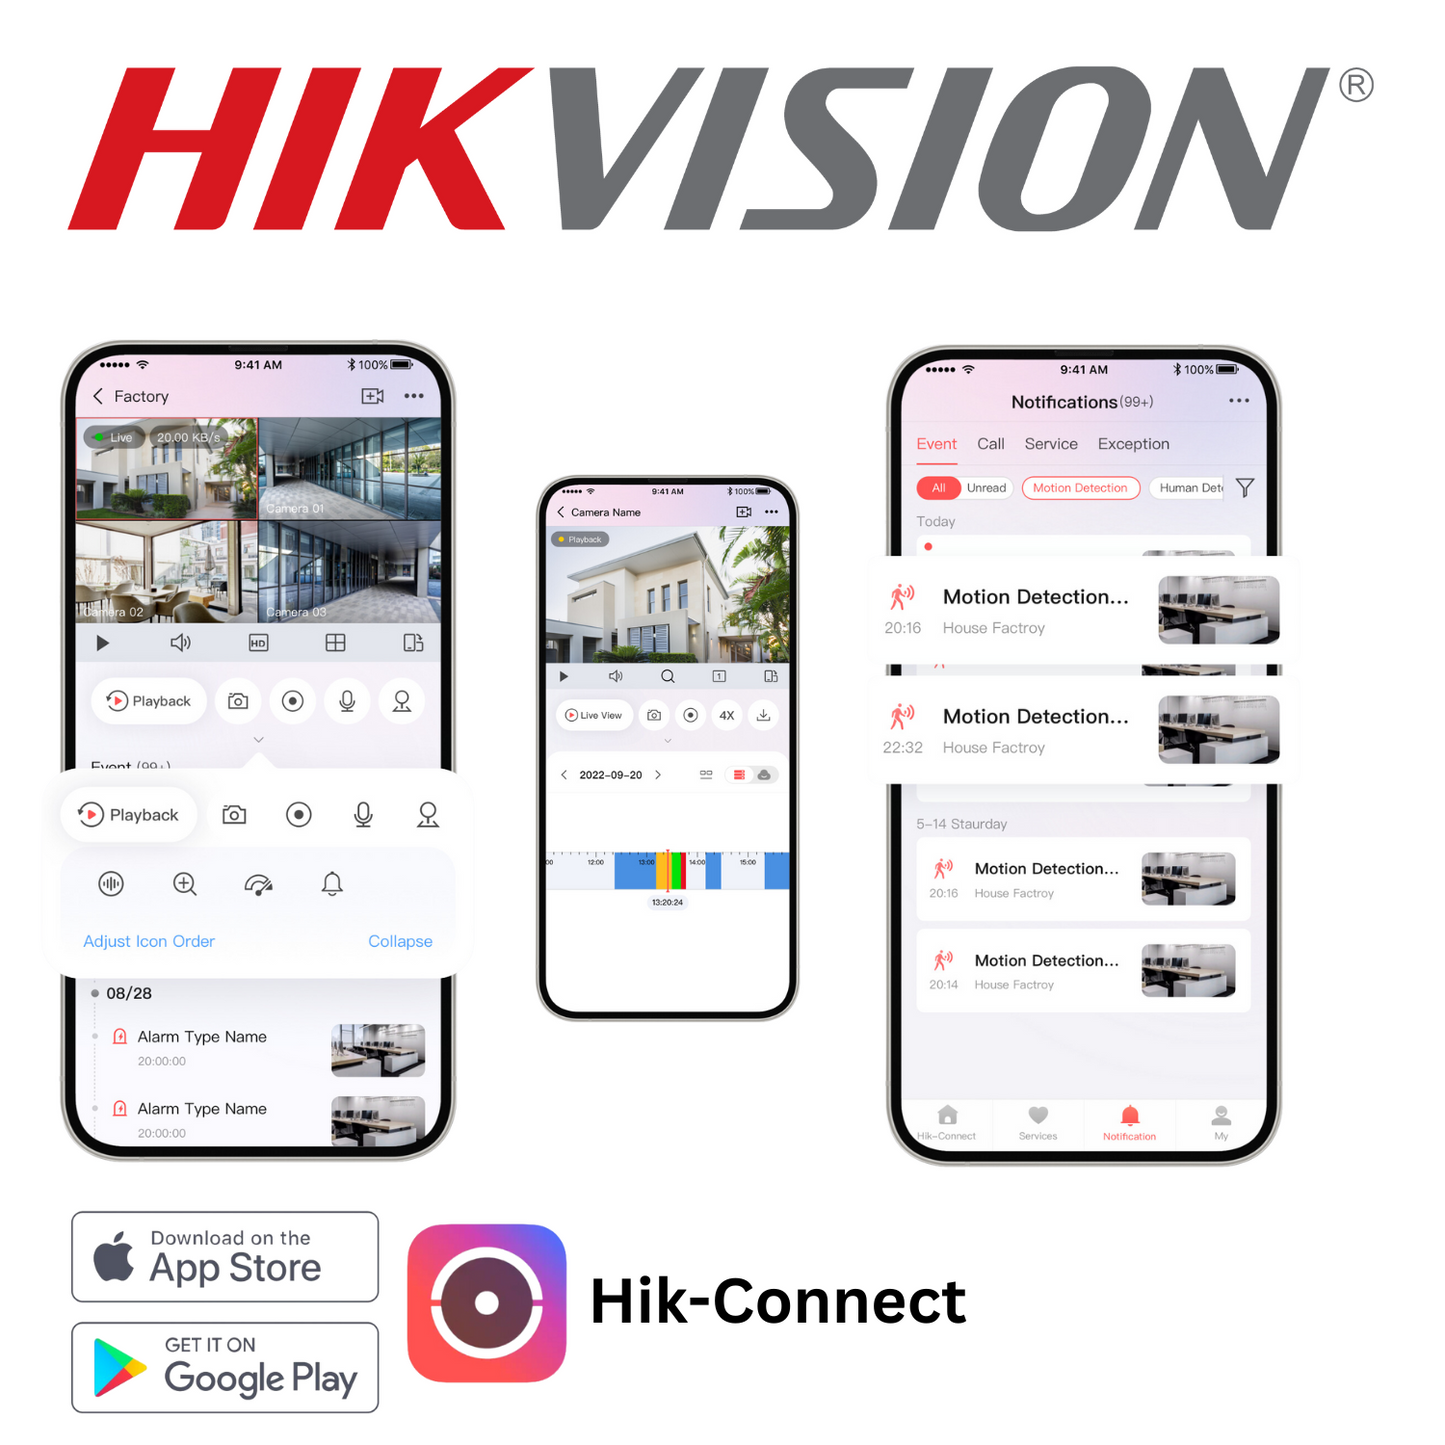 Hikvision CCTV kit, 1 x 8mp Panoramic Dual Camera, Colorvu, Acusense, IP POE and 2 way Audio cameras, 1 x 8 Channel POE NVR